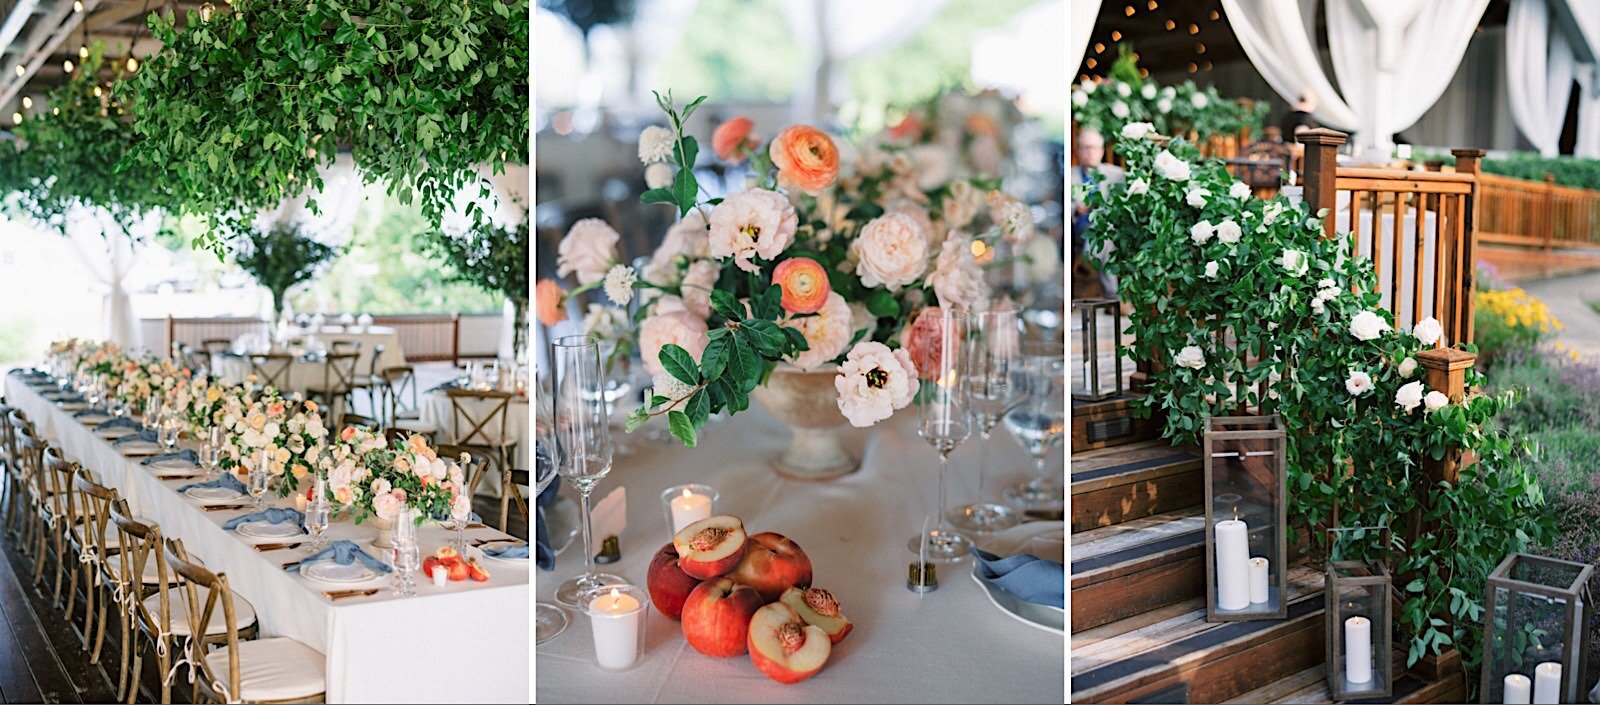 45_greenery_details_and_hanging_farms_Wedding_fresh_at_With_peaches_carnation.jpg